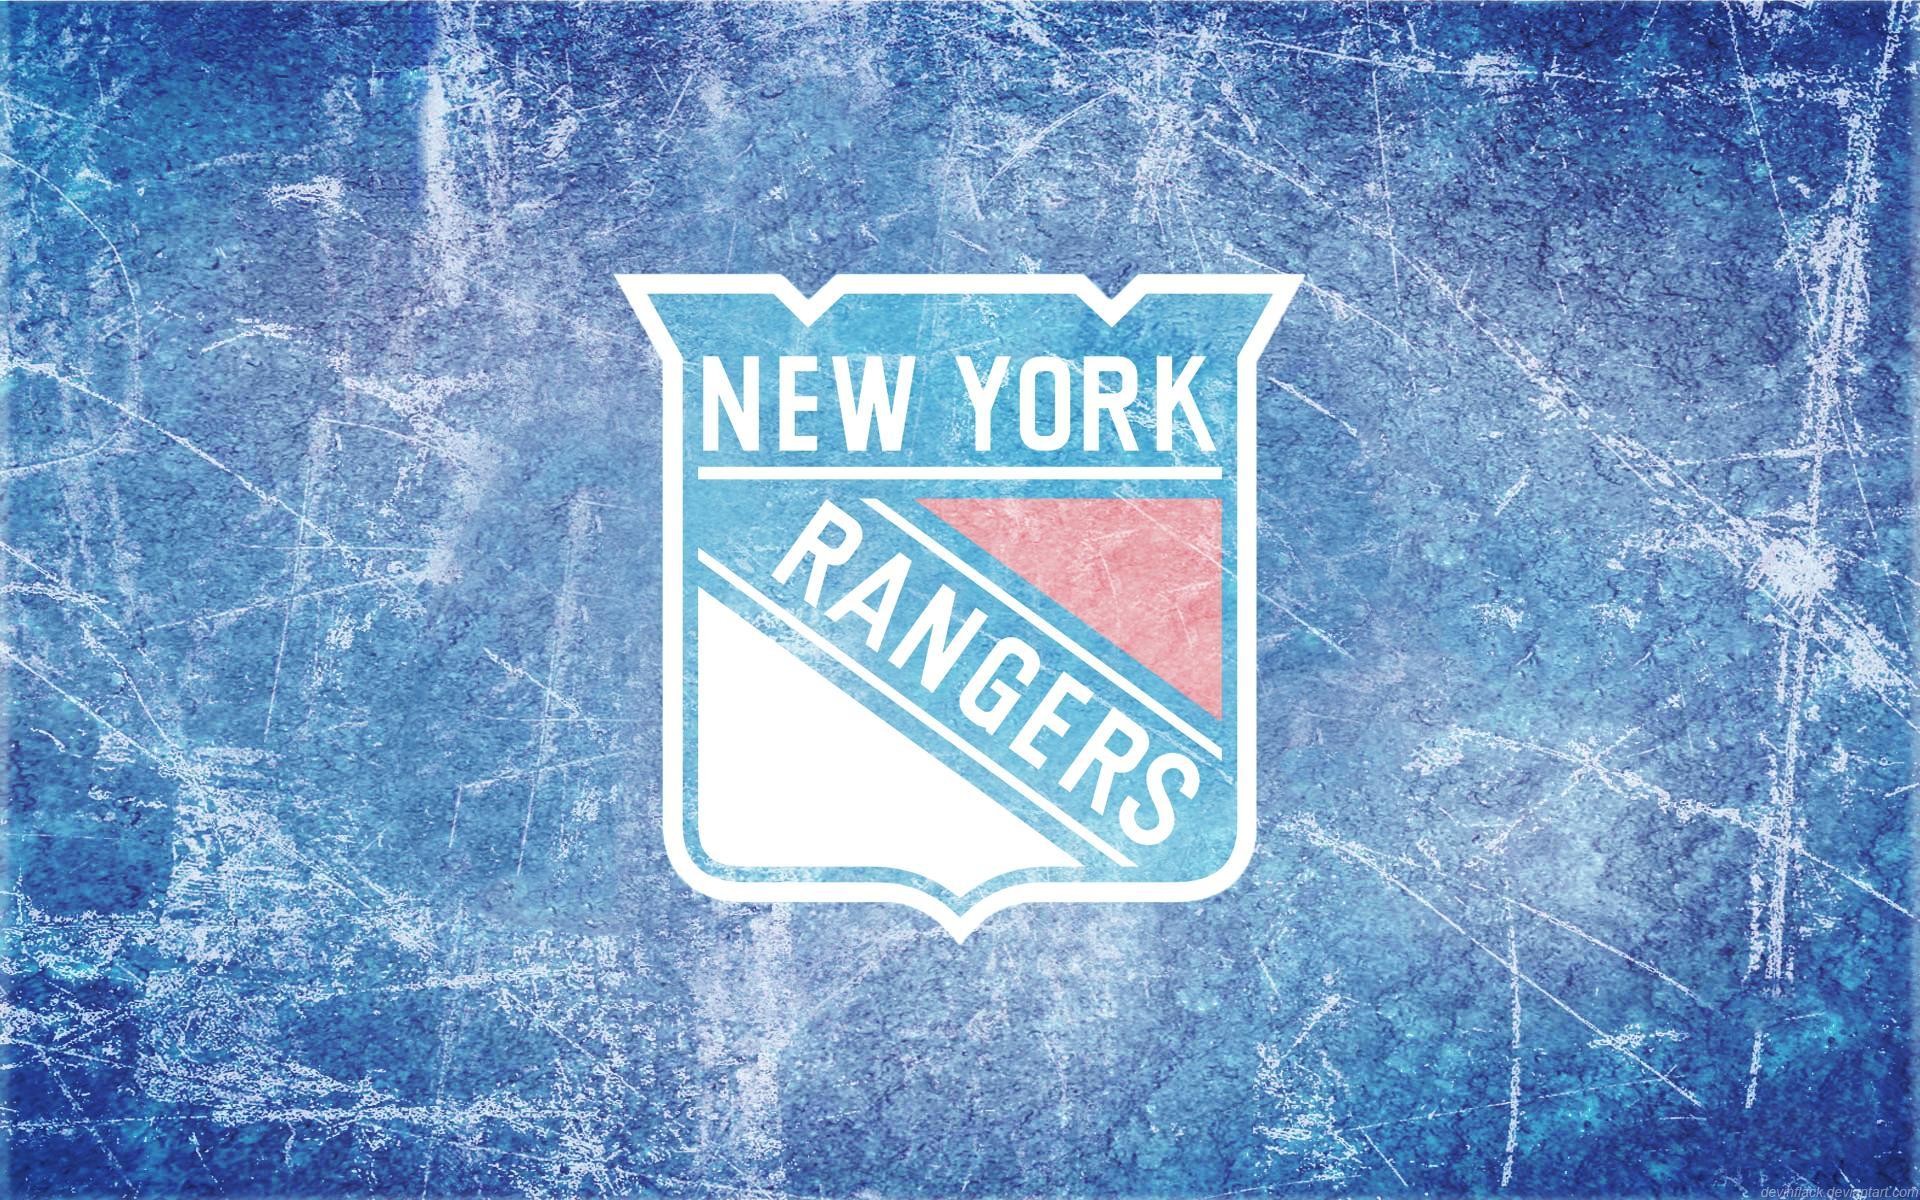 1920x1200 New York Rangers wallpapers | New York Rangers background - Page 2